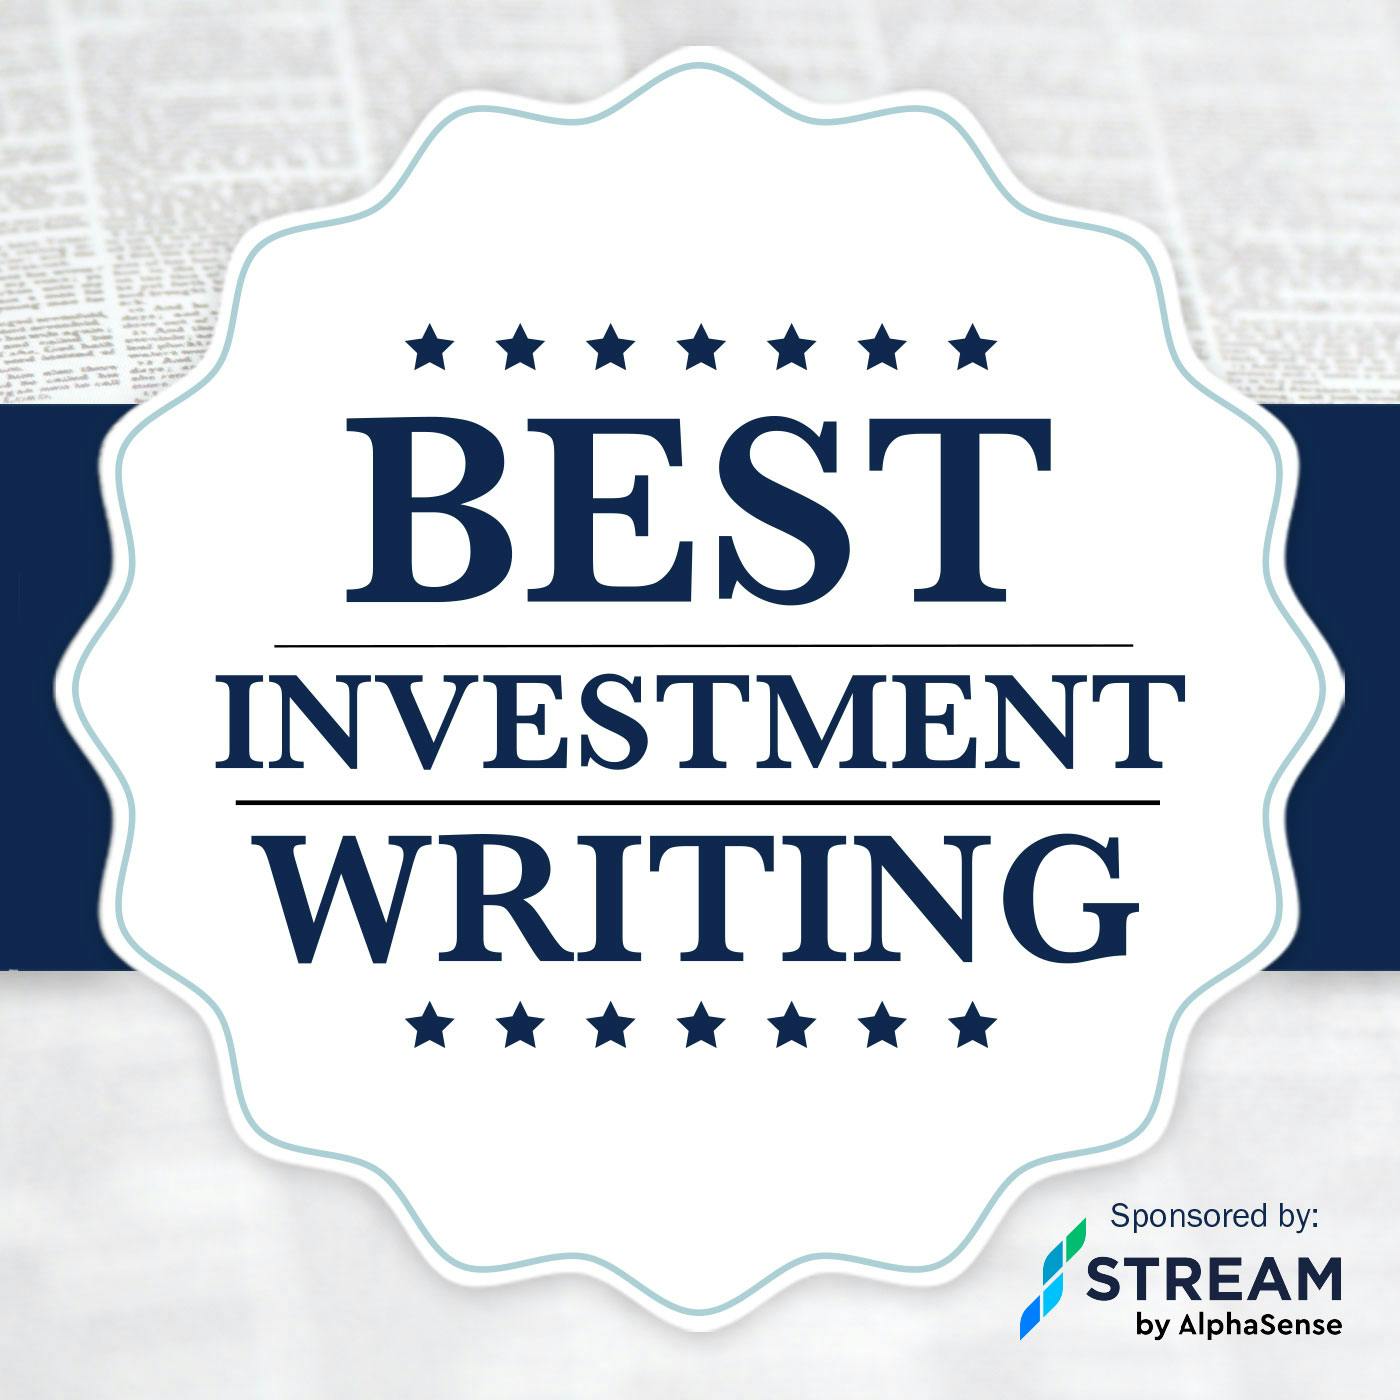 Richard Ennis – The Modern Endowment Story: A Ubiquitous U.S. Equity Risk Premium (The Best Investment Writing Volume 6)